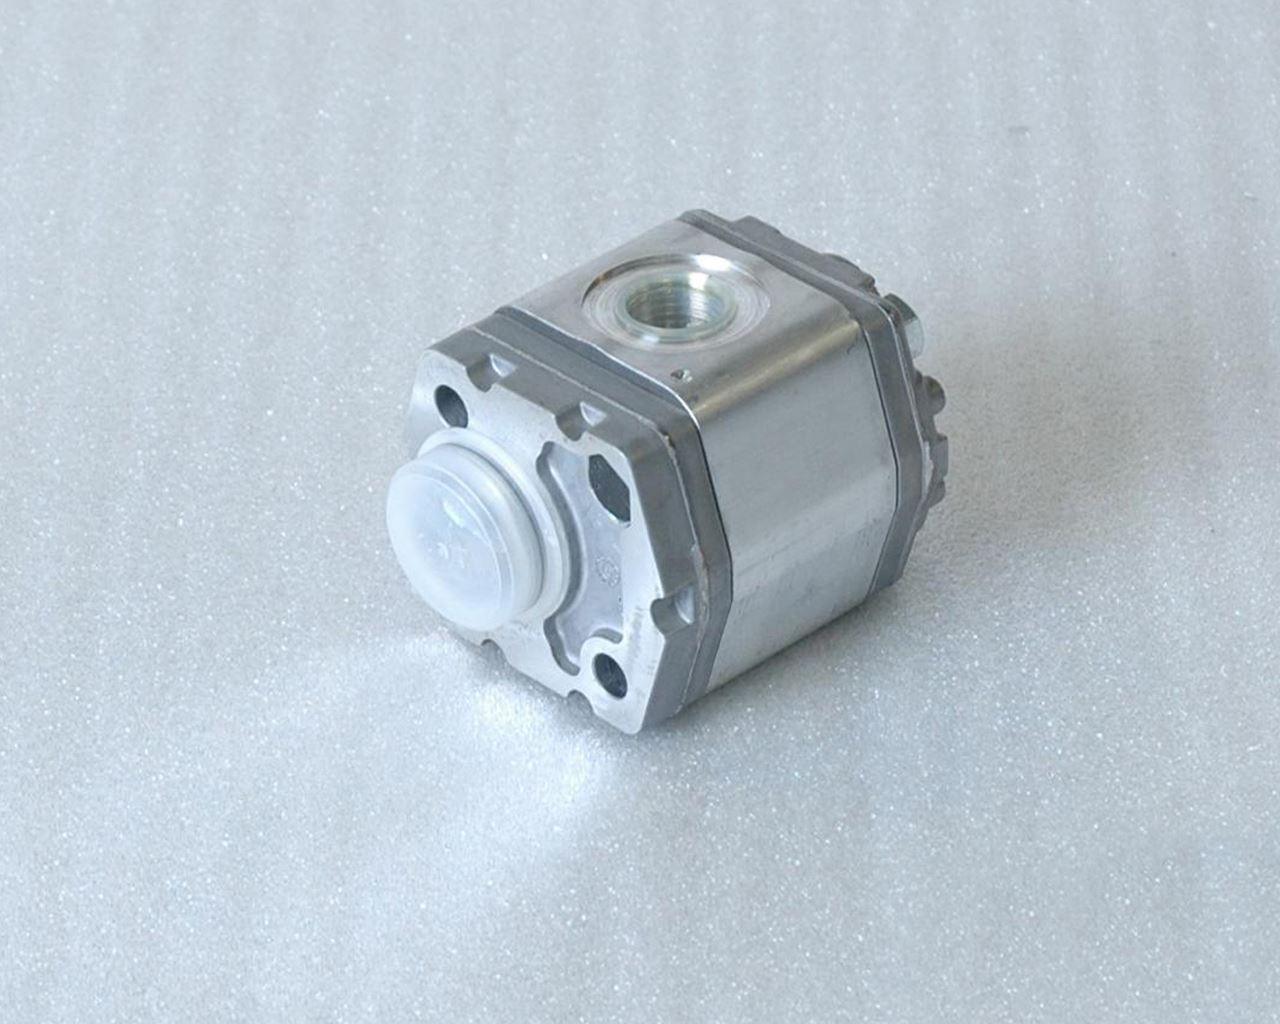 Lift table spare part - Hydraulic pump 1/2,6